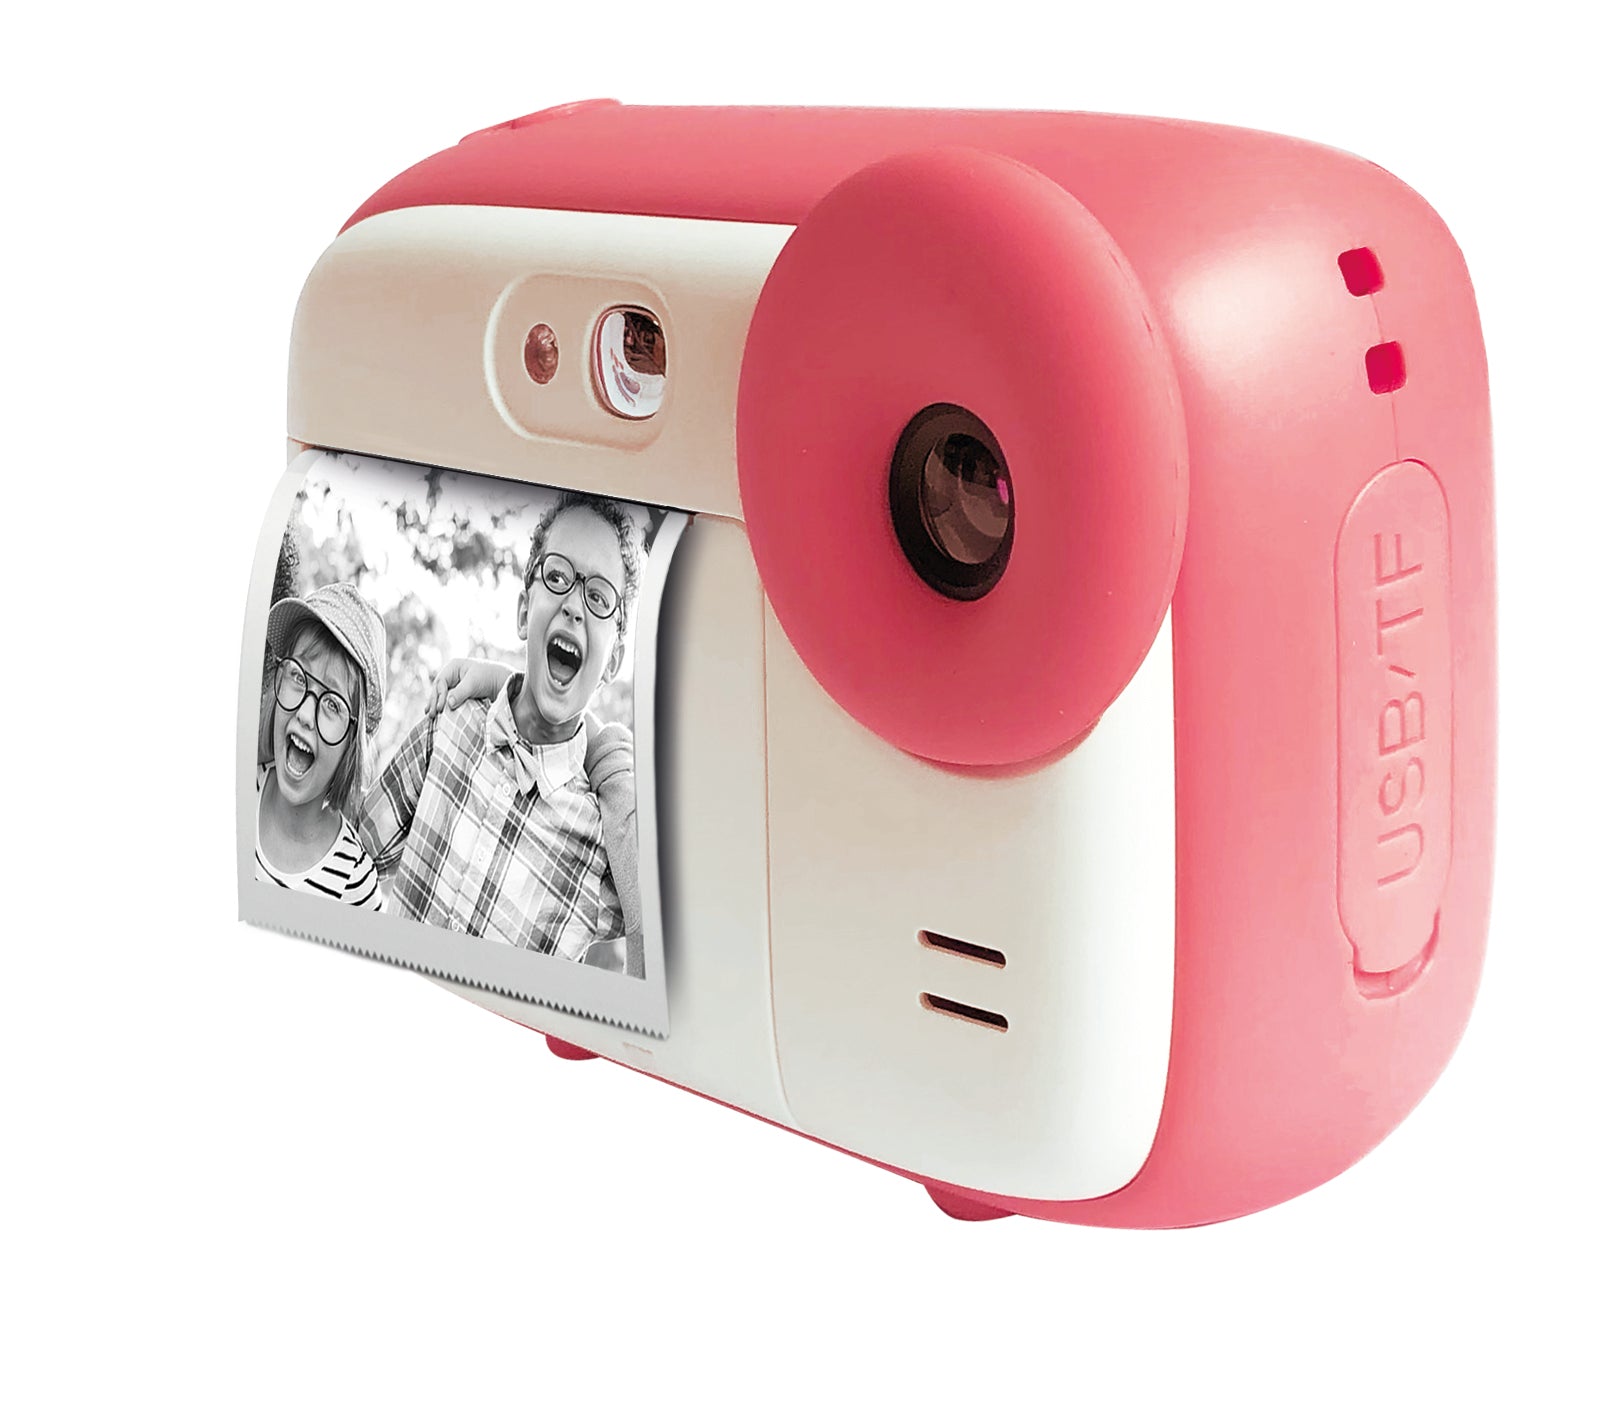 The Realikids Instant Cam is both a digital camera that takes photos/videos  and an instant camera that prints 5.7 x 10 cm black and white photos. No  ink, By AgfaPhoto Europe